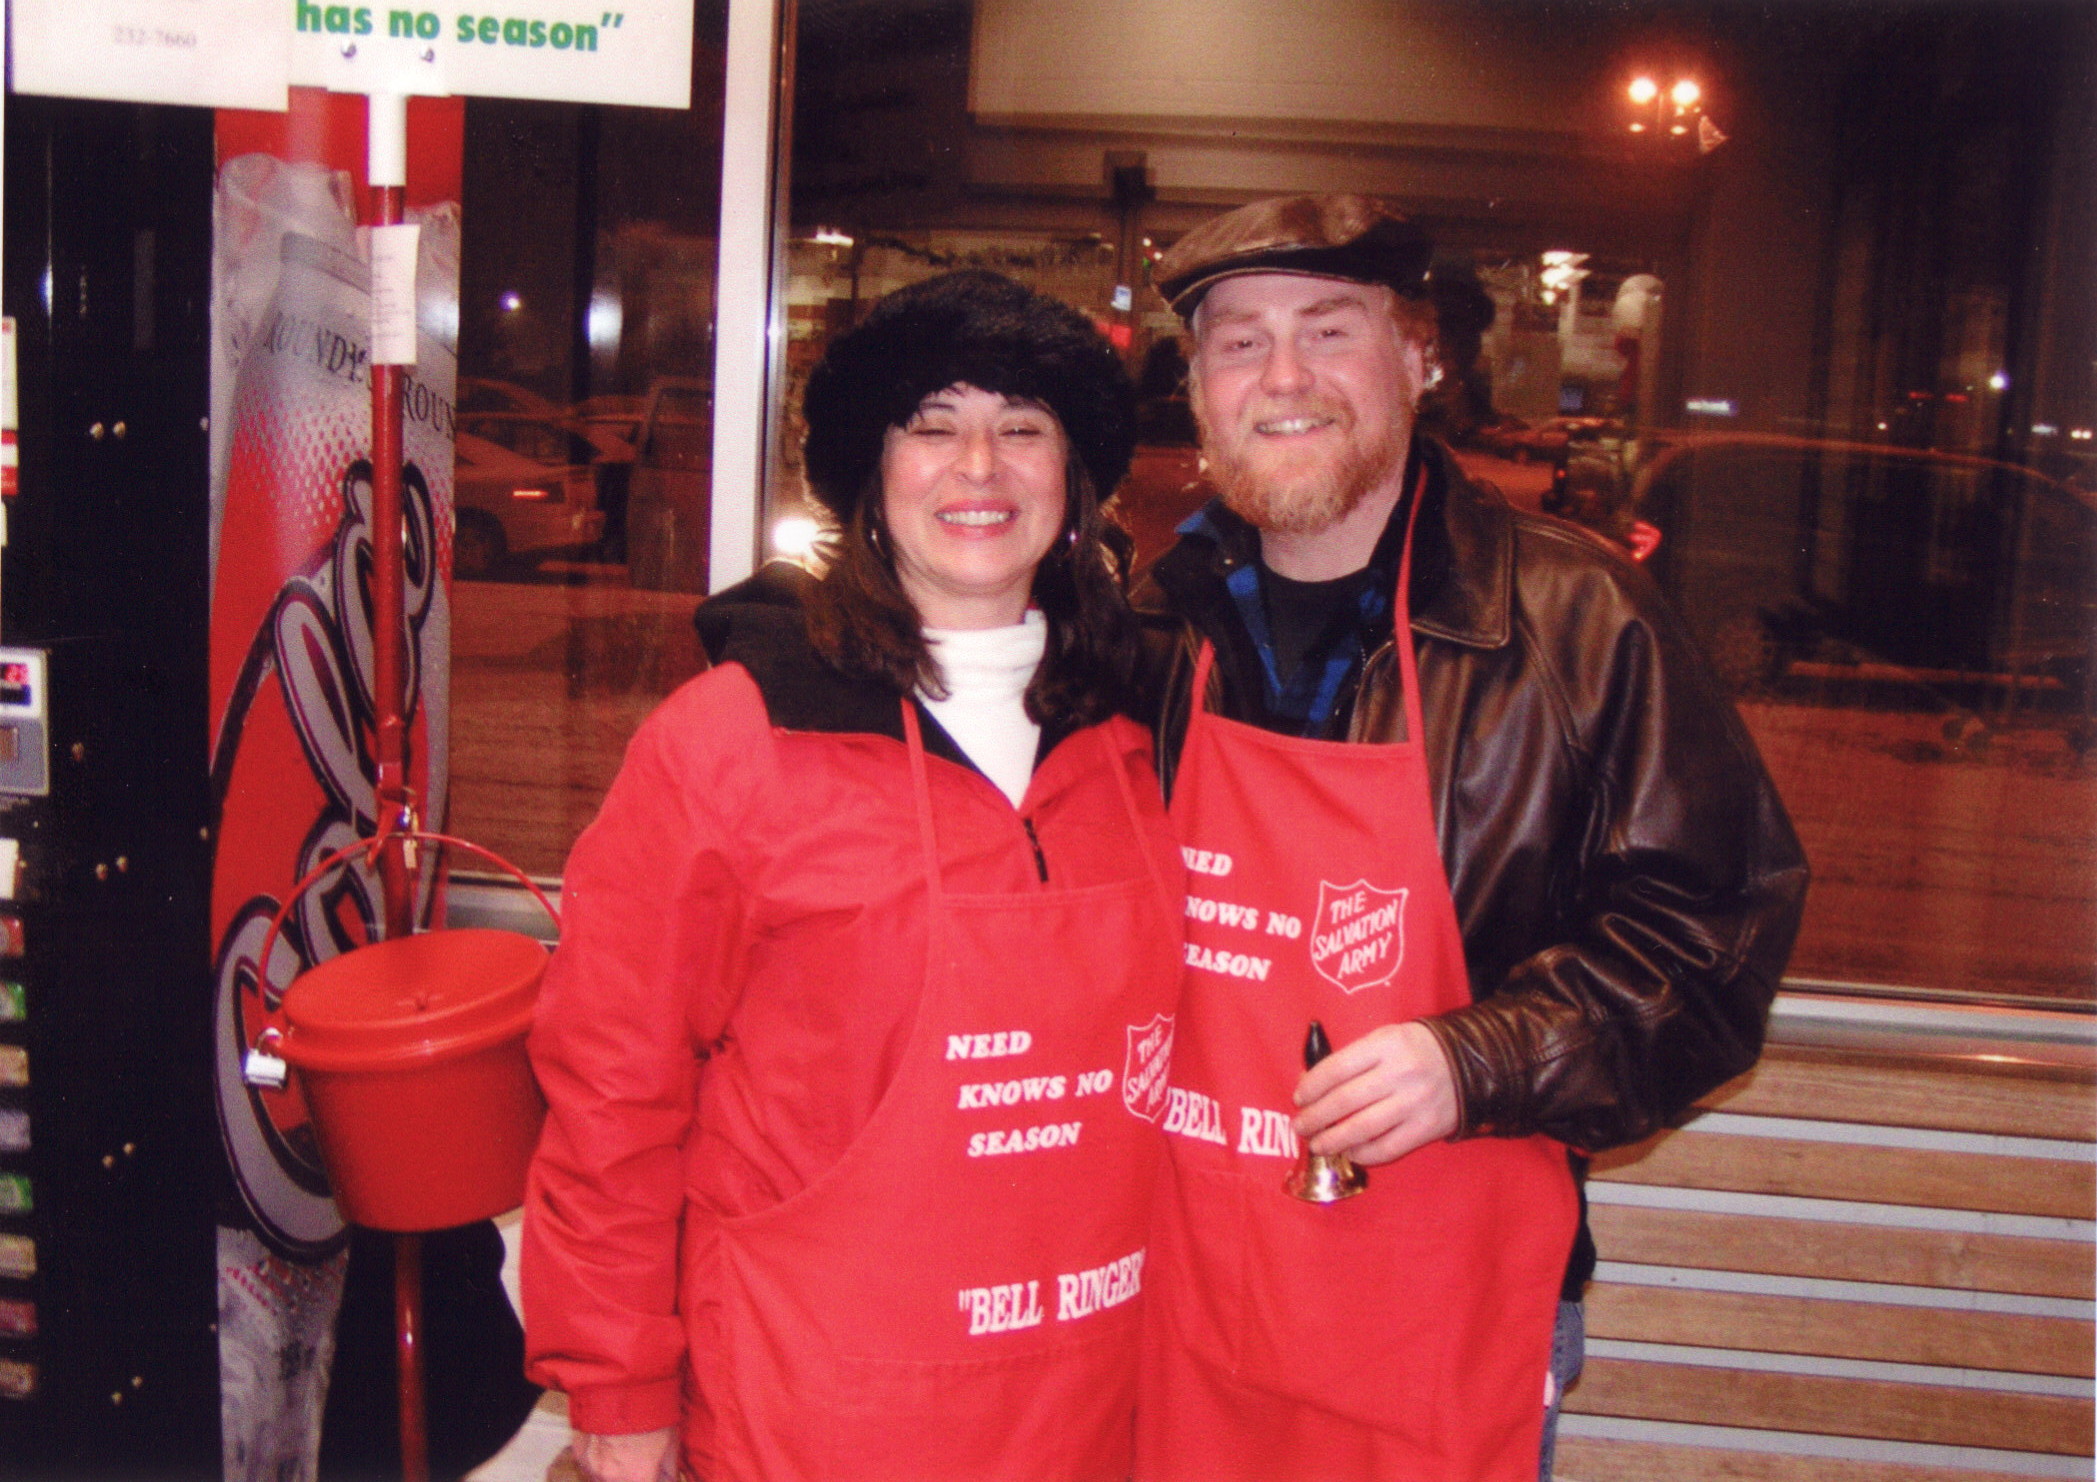 Bellringing for the Salvation Army